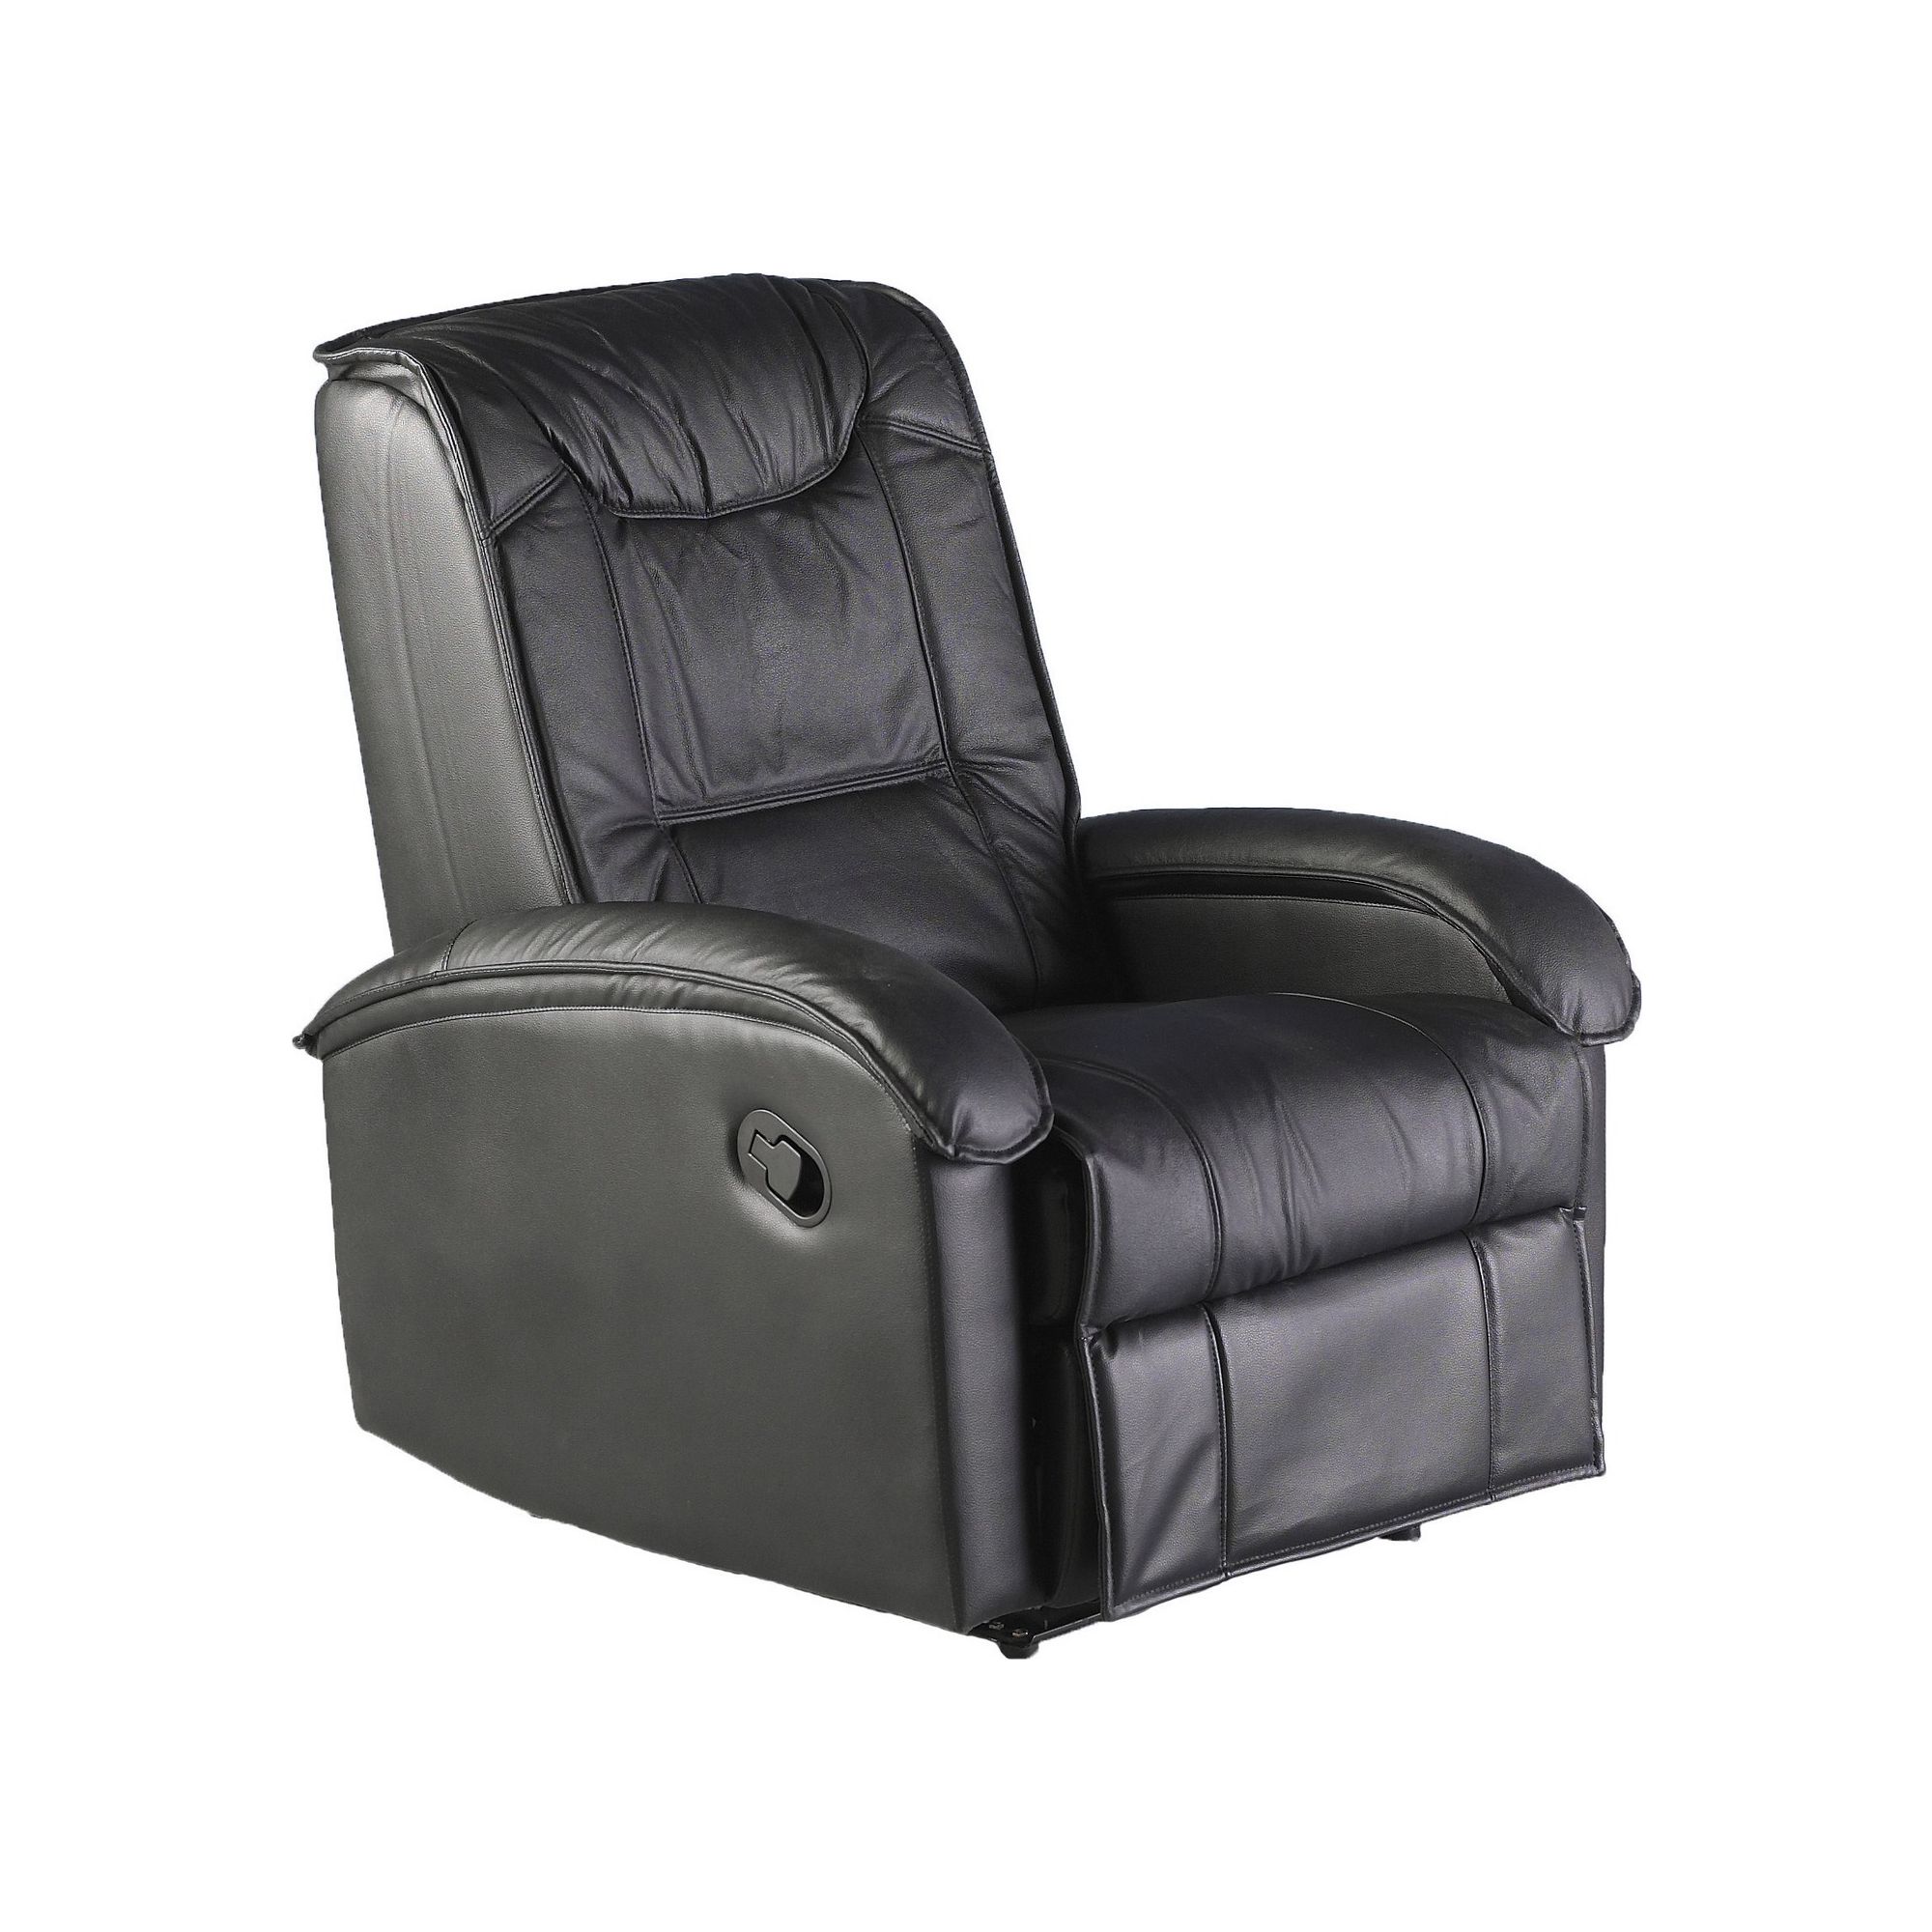 Home Essence Shangrila Recliner in Black at Tesco Direct